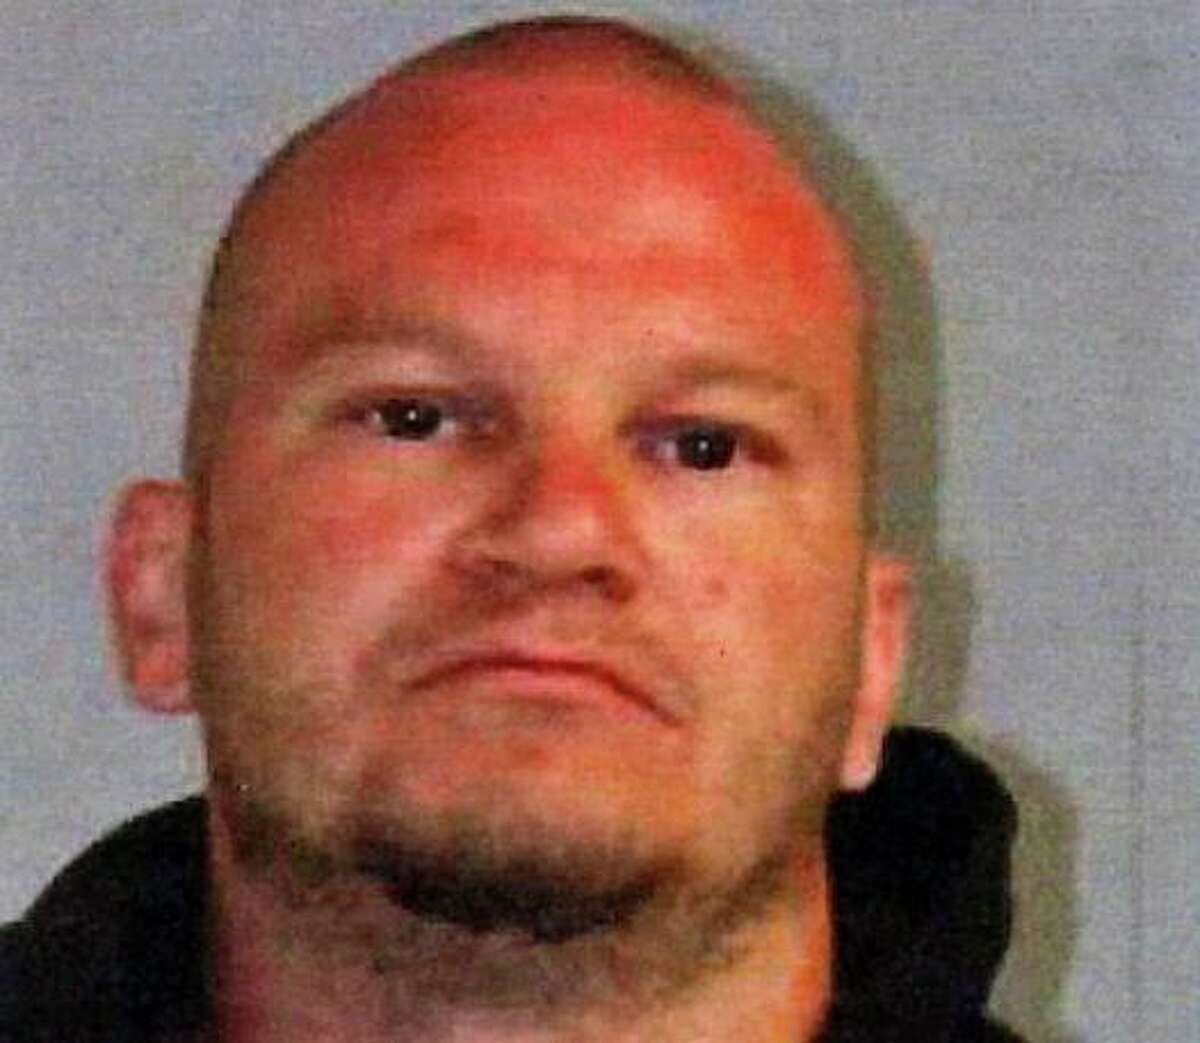 Jesse James Brown, 30, of Pomfret, Conn., was taken into custody on Monday, May 24, 2021.